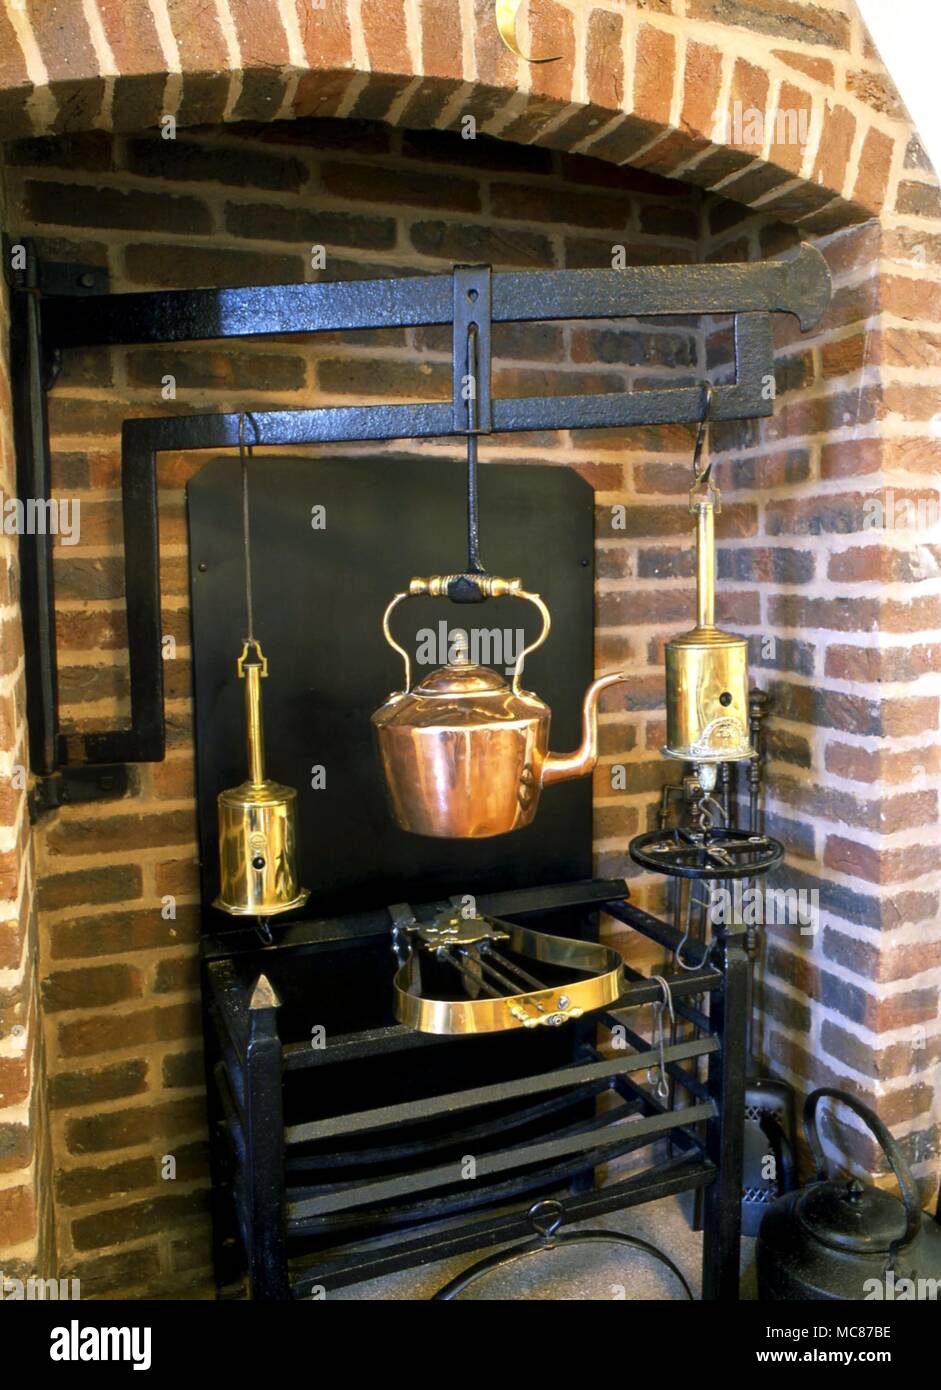 Susanna's Kitchen' in the Old Rectory at Epworth, once haunted by intensive poltergeist activity (from 1715). The noises were heard in 'Old Jeffrey's Room' at first and centred on the kitchen Stock Photo